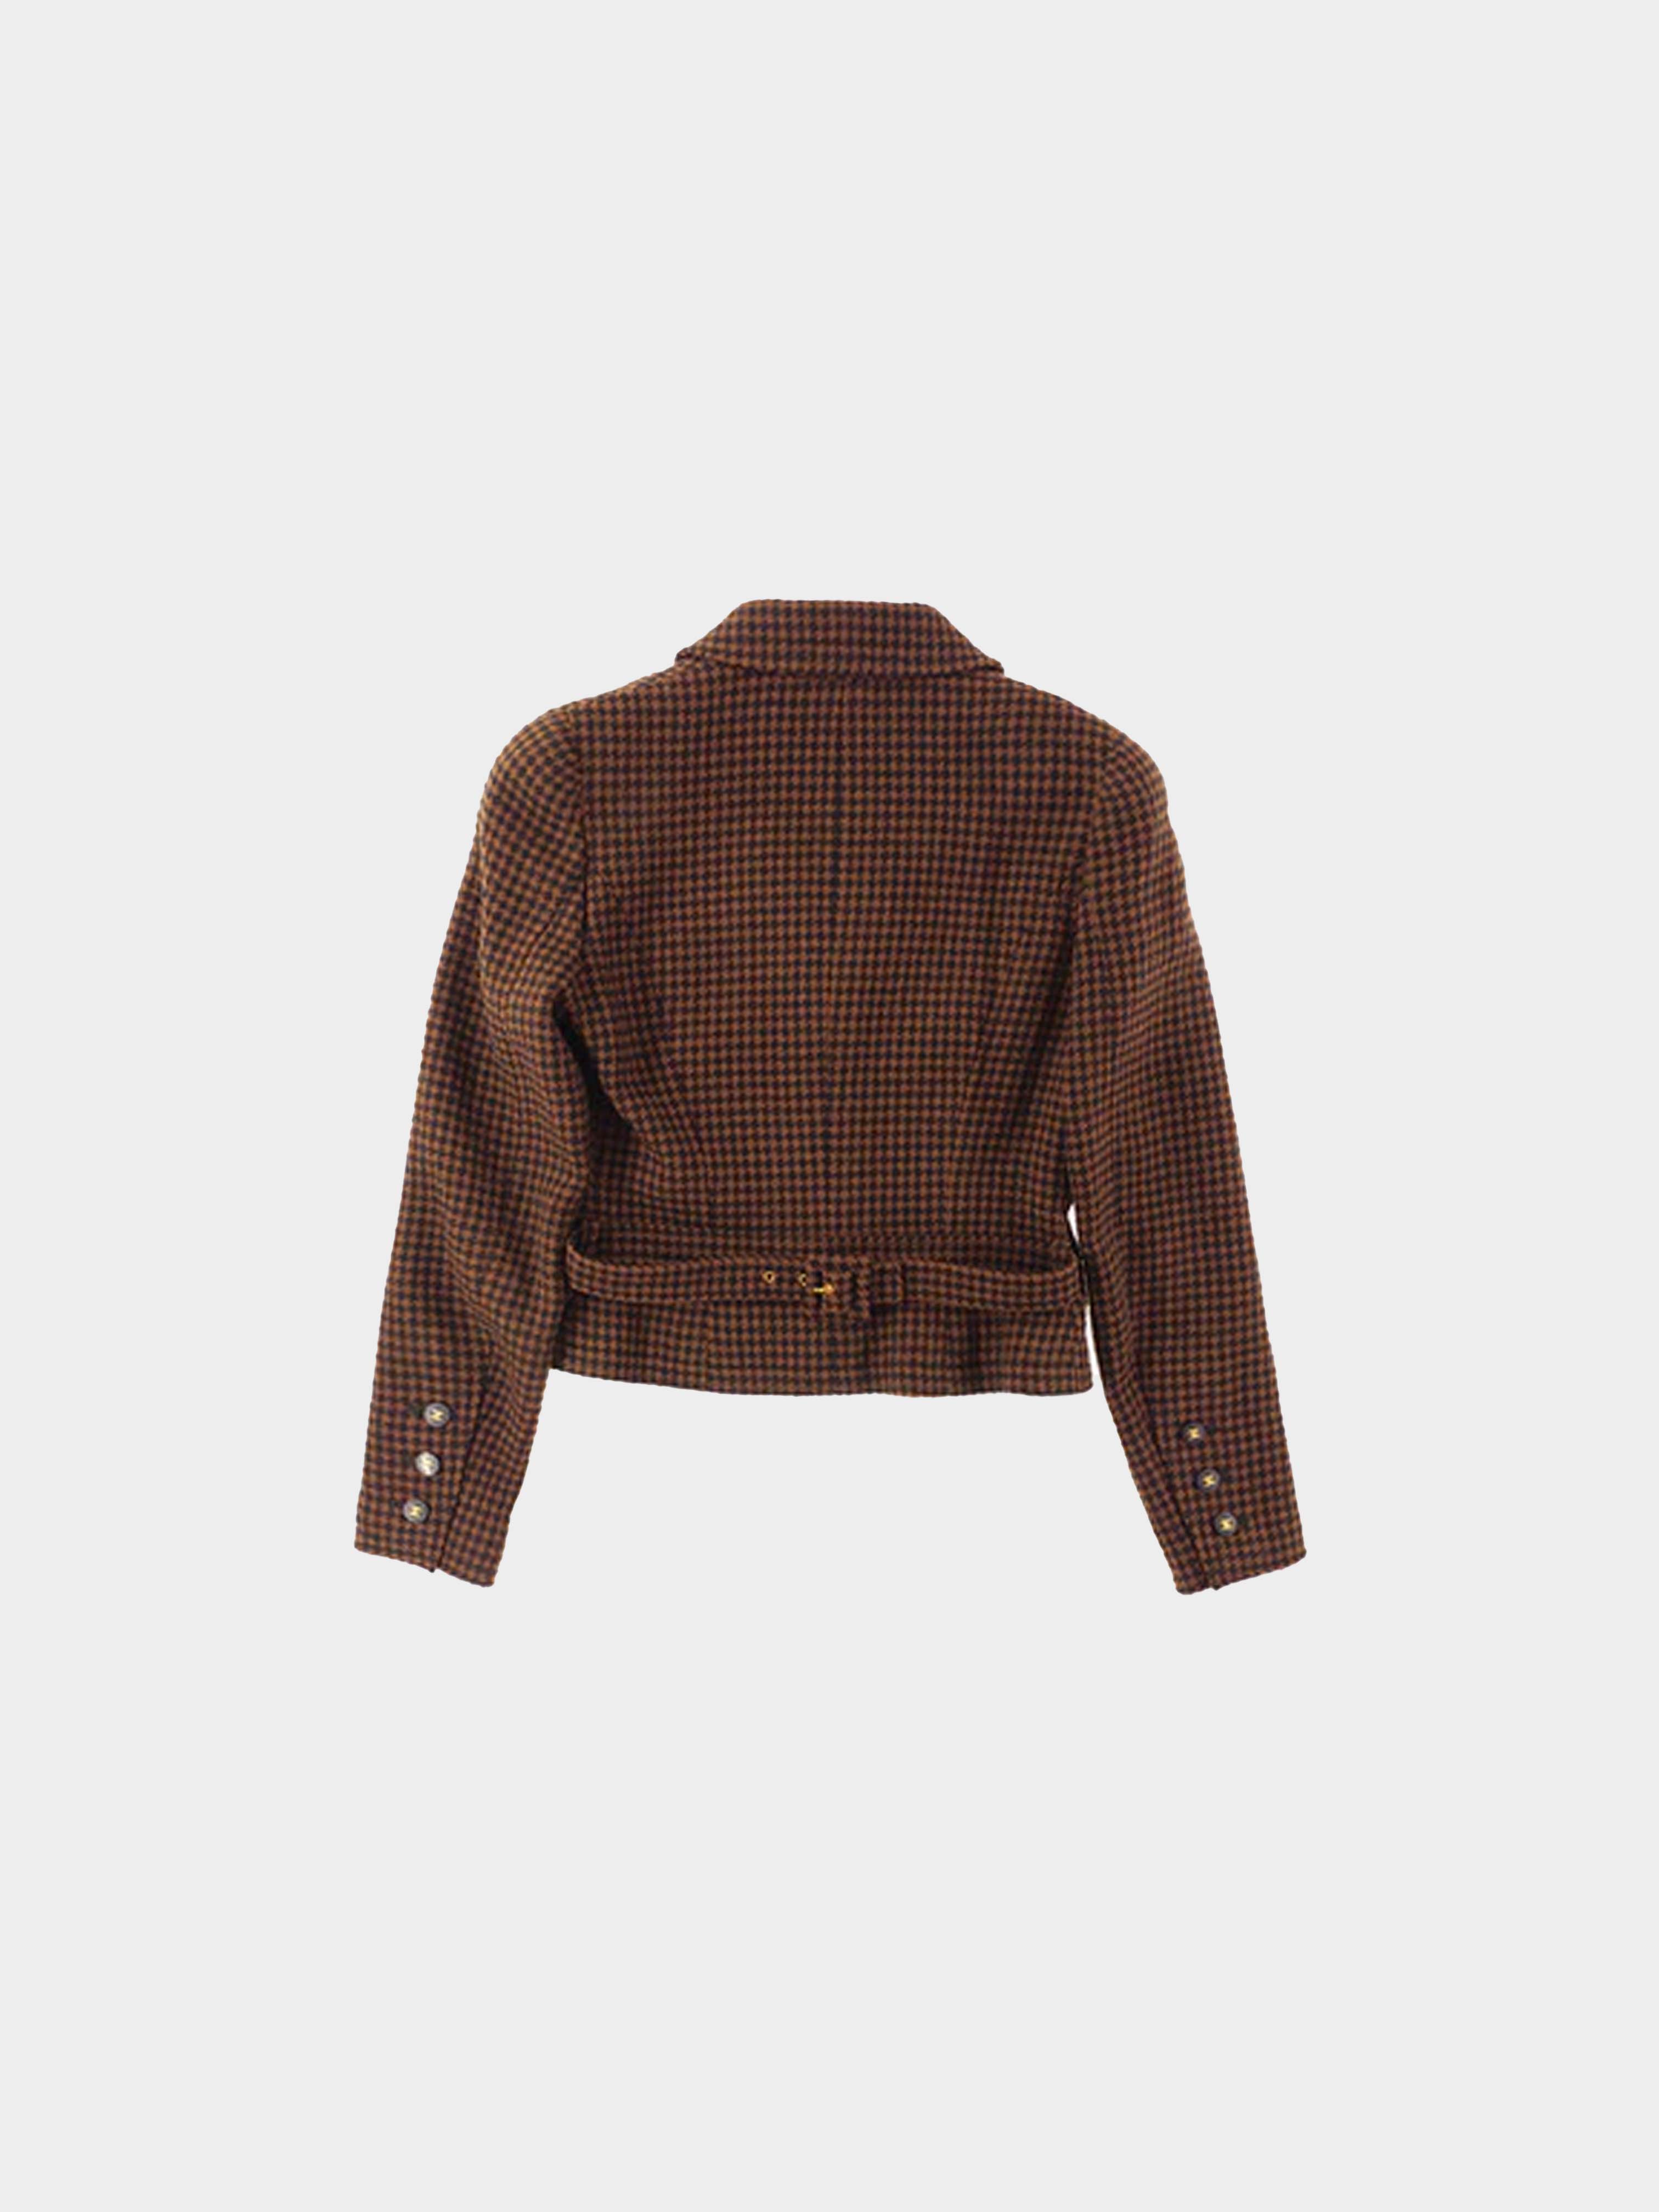 Chanel AW 1997 Brown Tweed Jacket · INTO